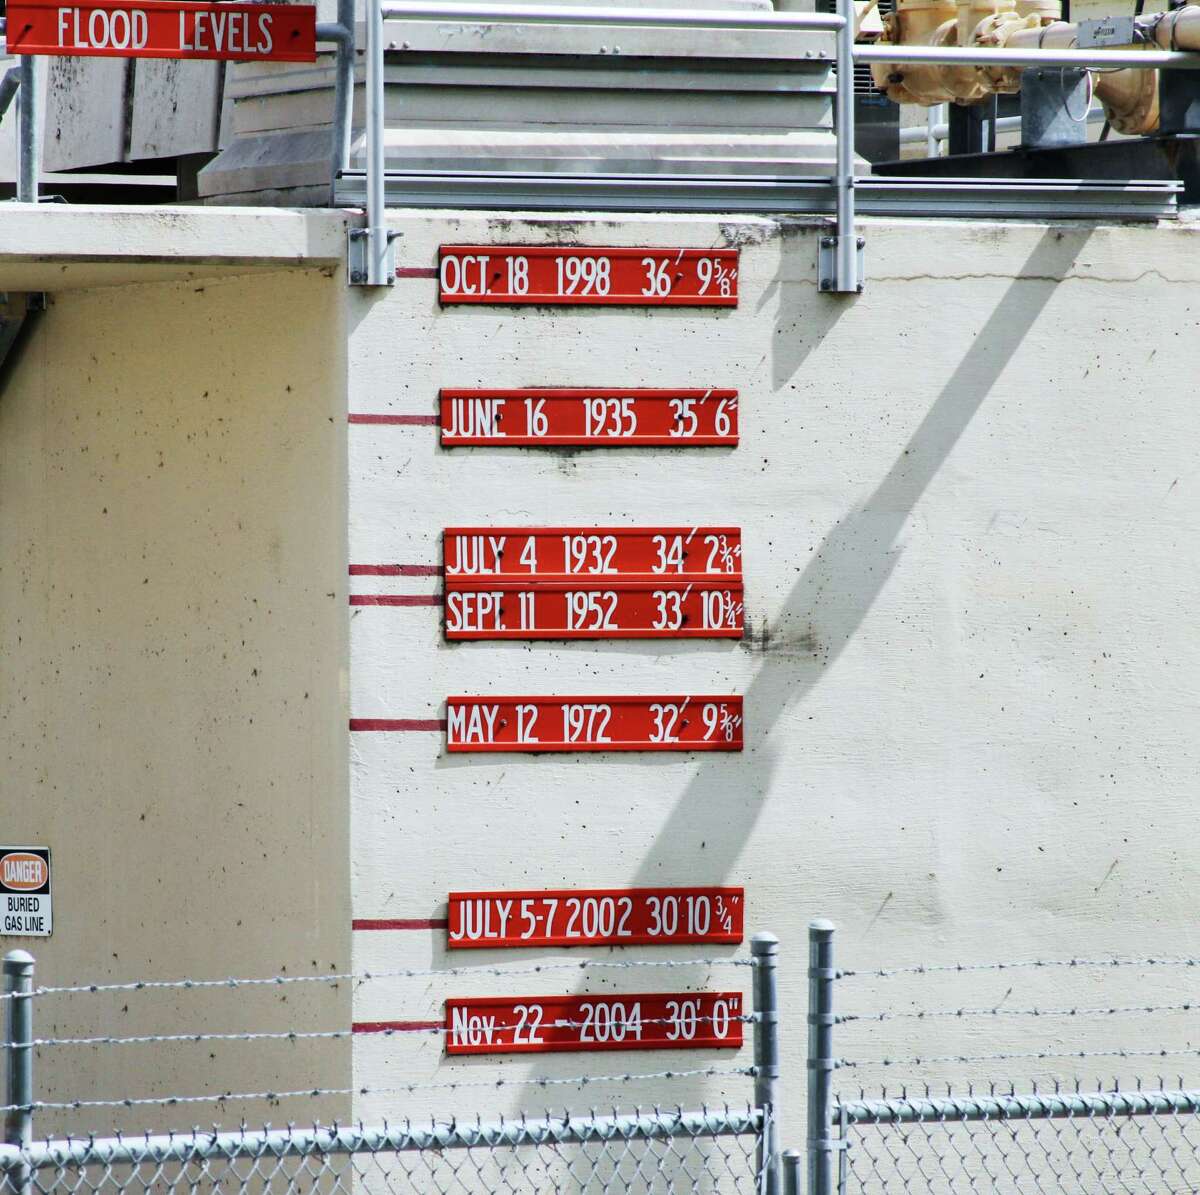 Major flood crests marked on the Seguin water treatment plant on the Guadalupe River show the record level of the 1998 flood.